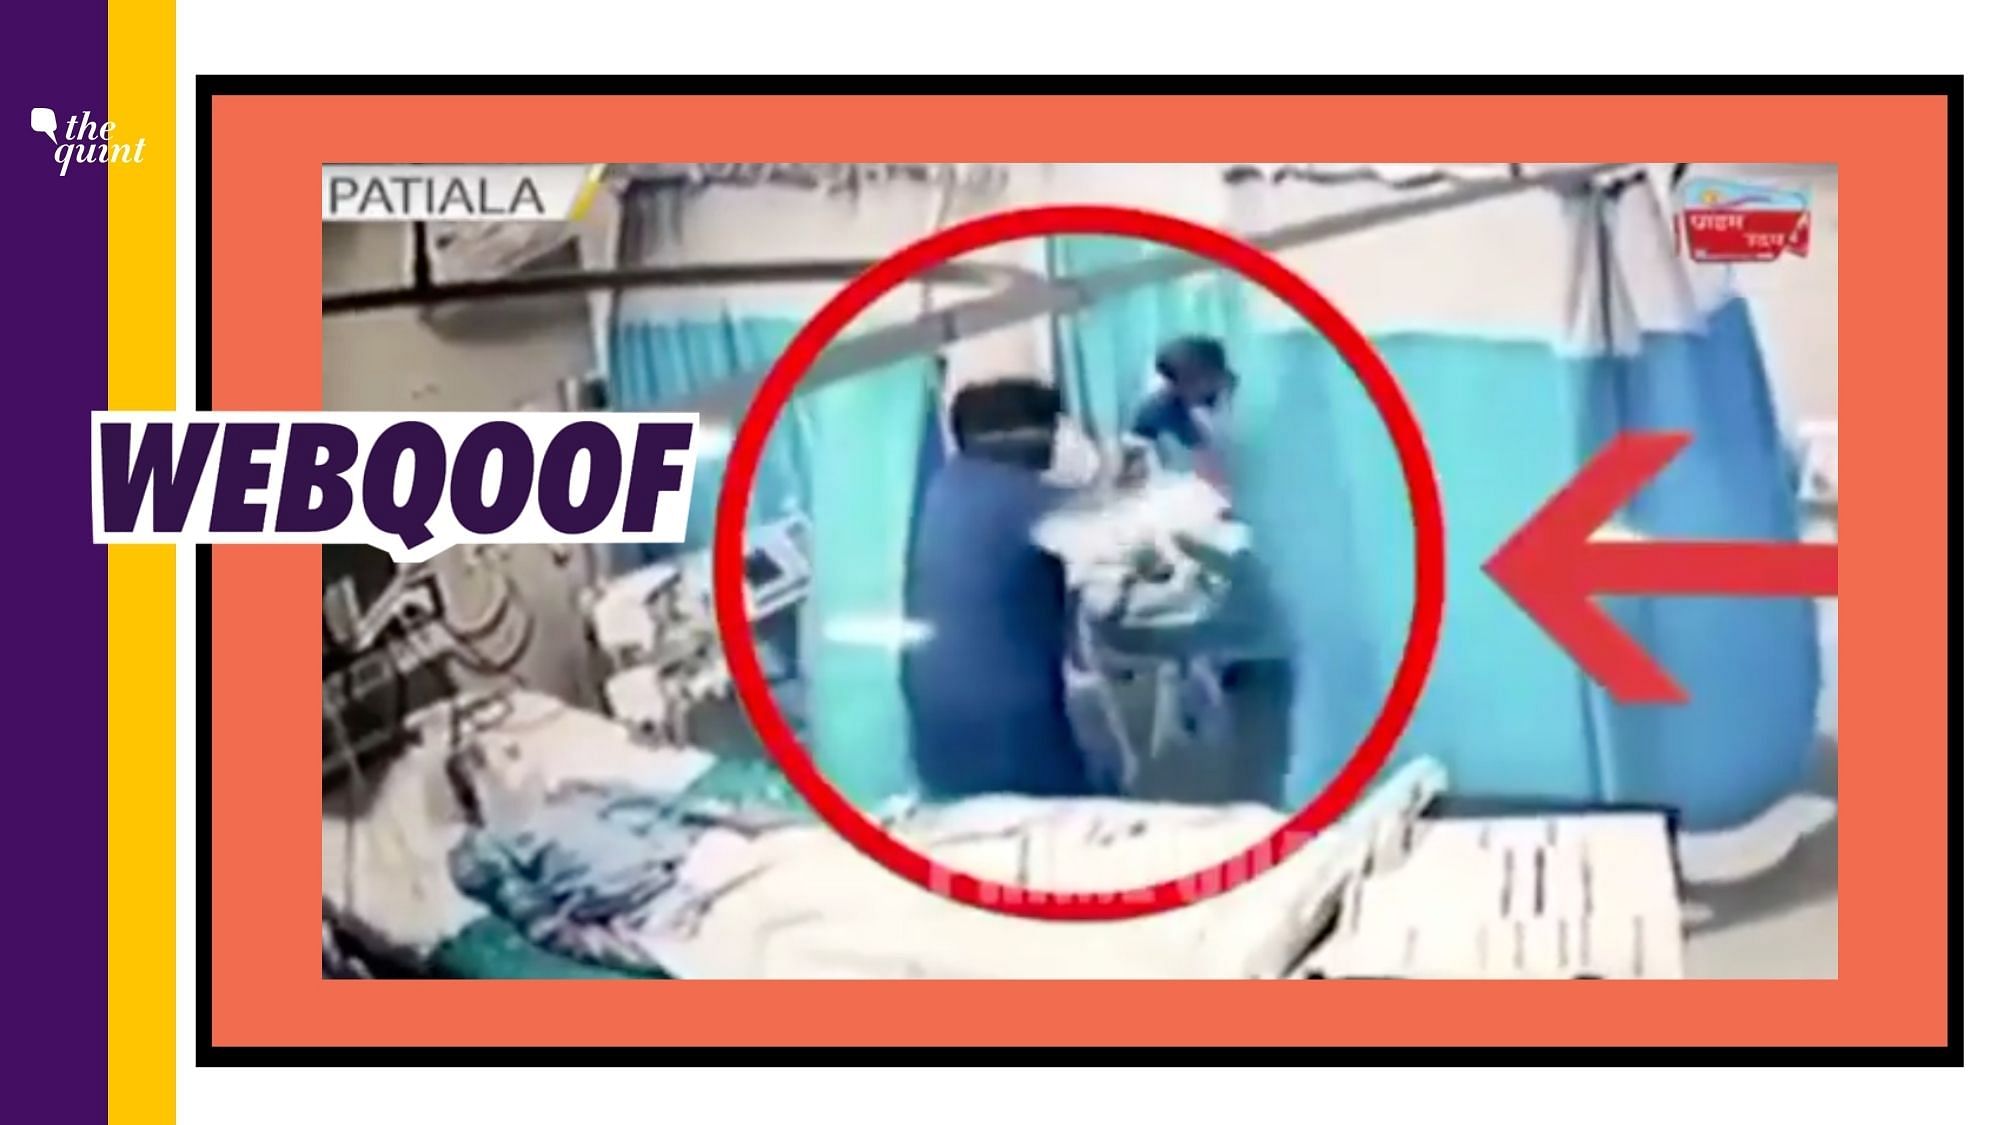 The viral clip is from an old incident that took place in Patiala and has been revived as a recent incident.